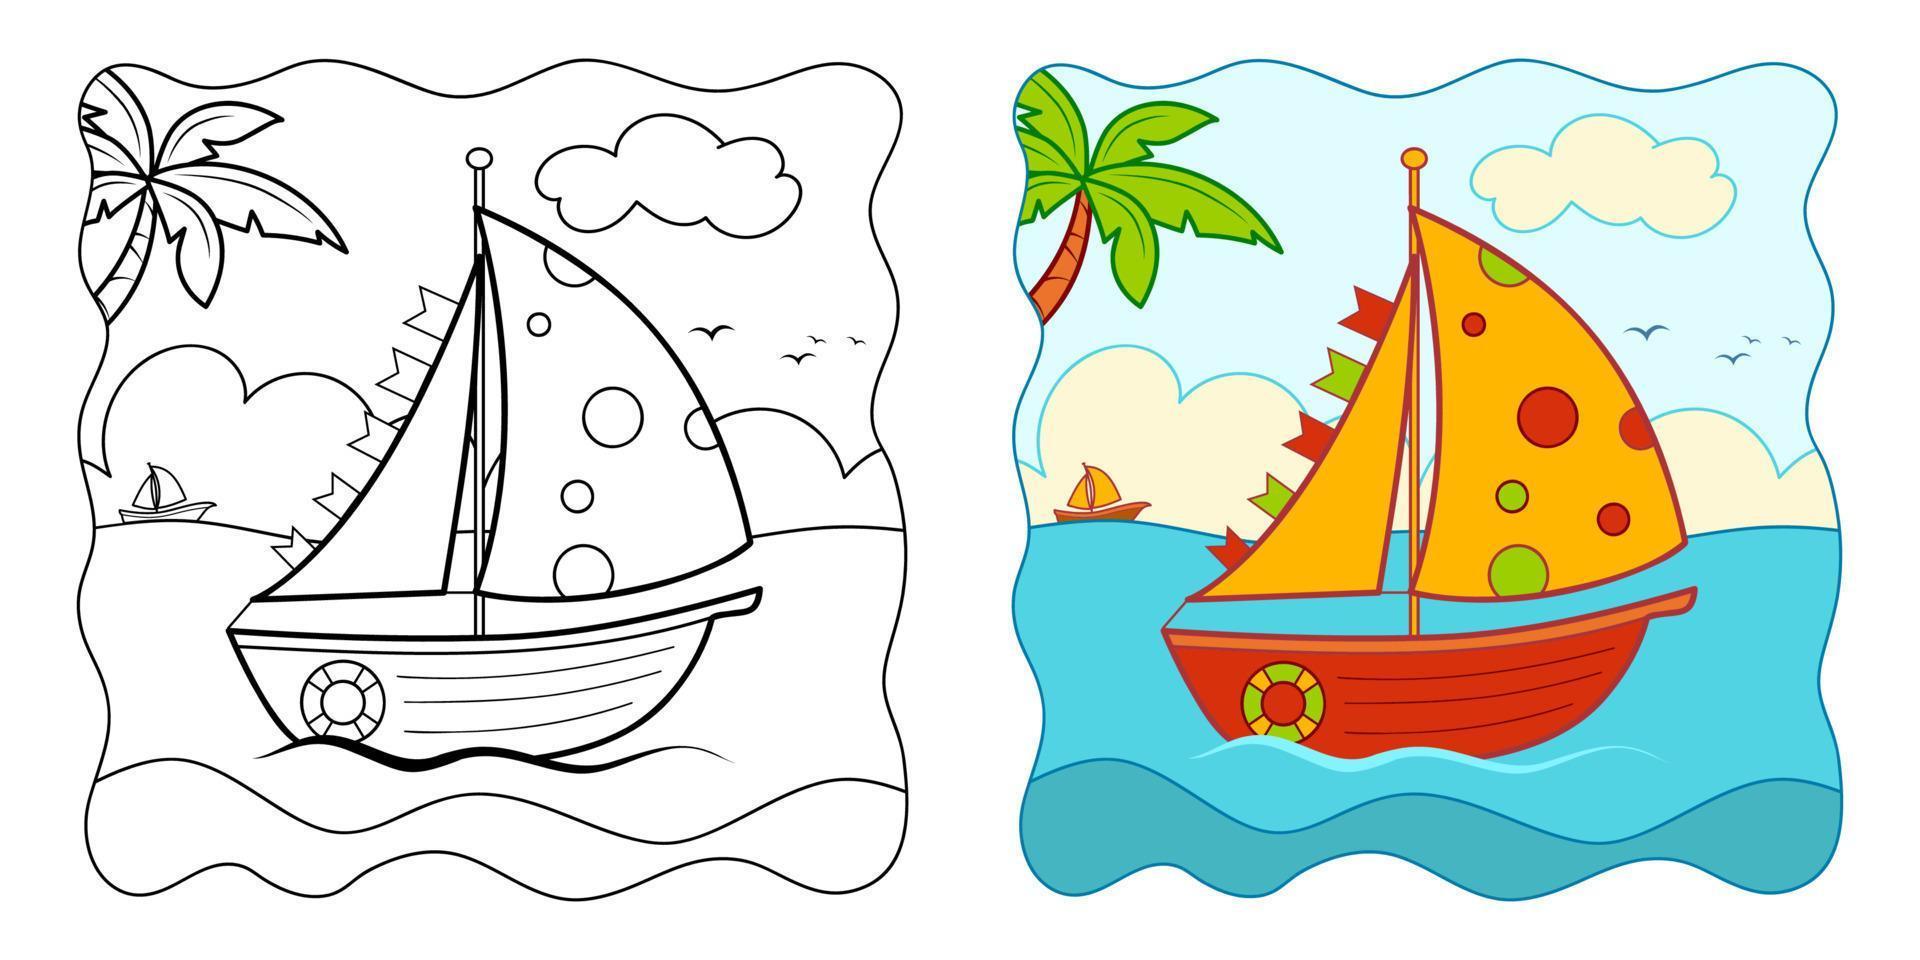 Coloring book or Coloring page for kids. Boat vector clipart. Nature background.